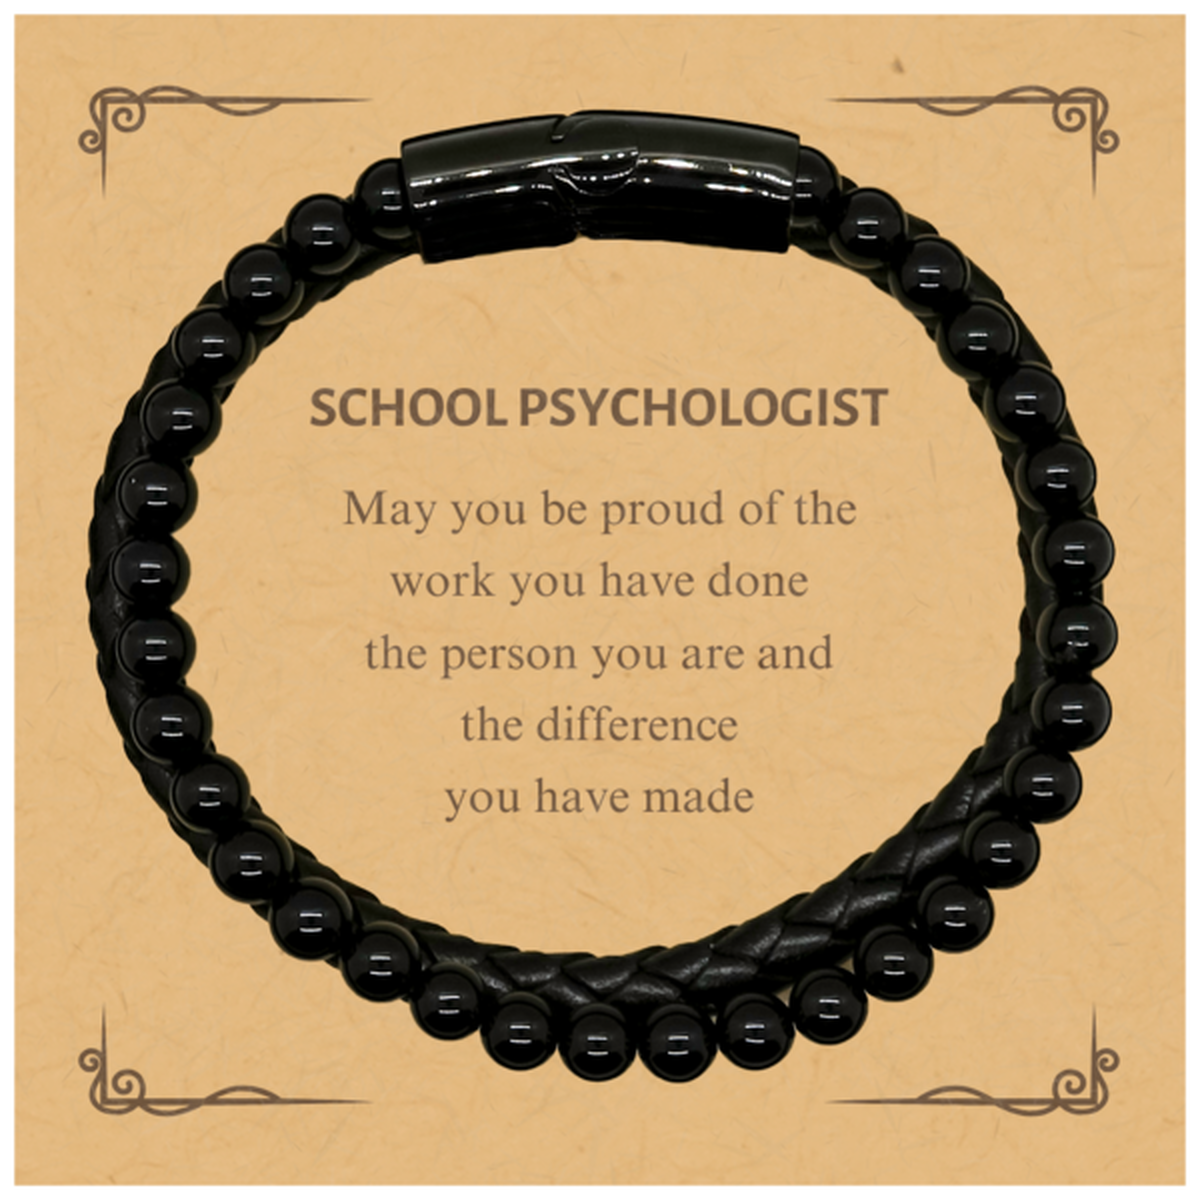 School Psychologist May you be proud of the work you have done, Retirement School Psychologist Stone Leather Bracelets for Colleague Appreciation Gifts Amazing for School Psychologist